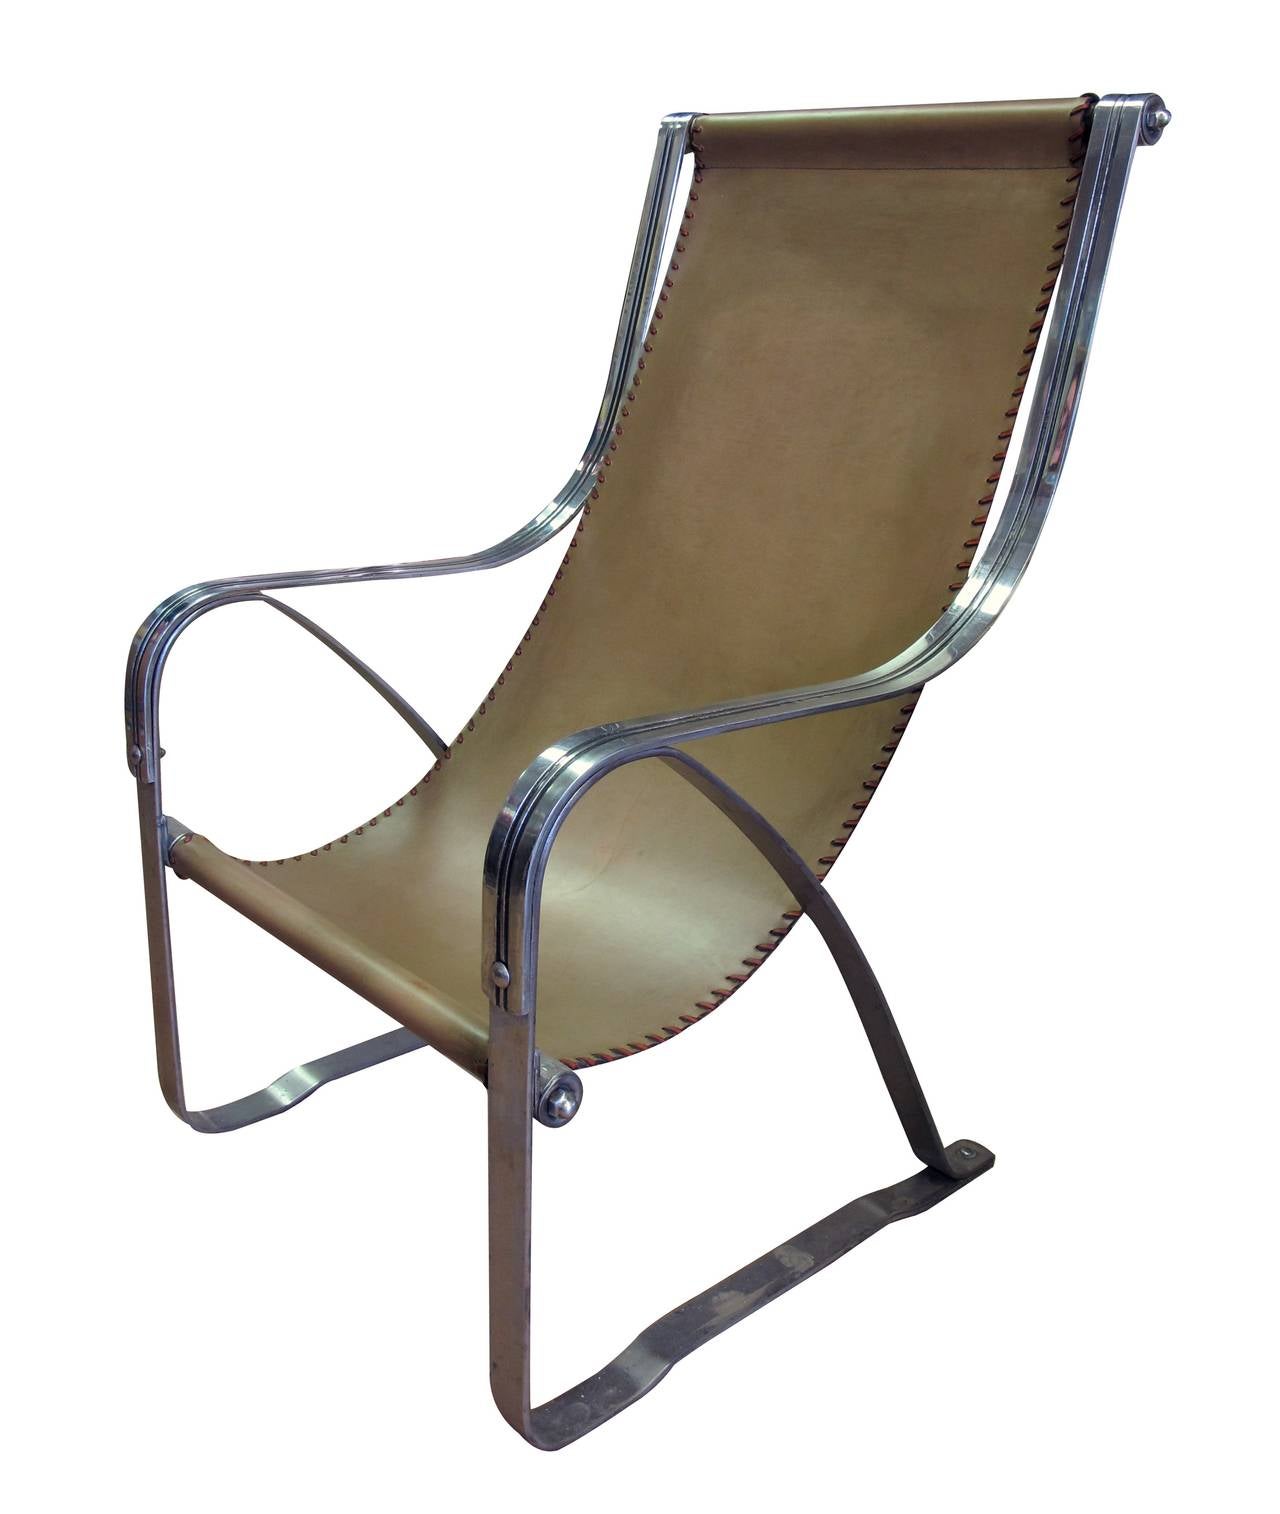 A rare American machine age art deco spring chair by John McKay; chrome plated and band steel frame with later leather sling seat and pillow; for the Miami Pavilion of the House of Tomorrow for the 1933-34 Chicago World's Fair